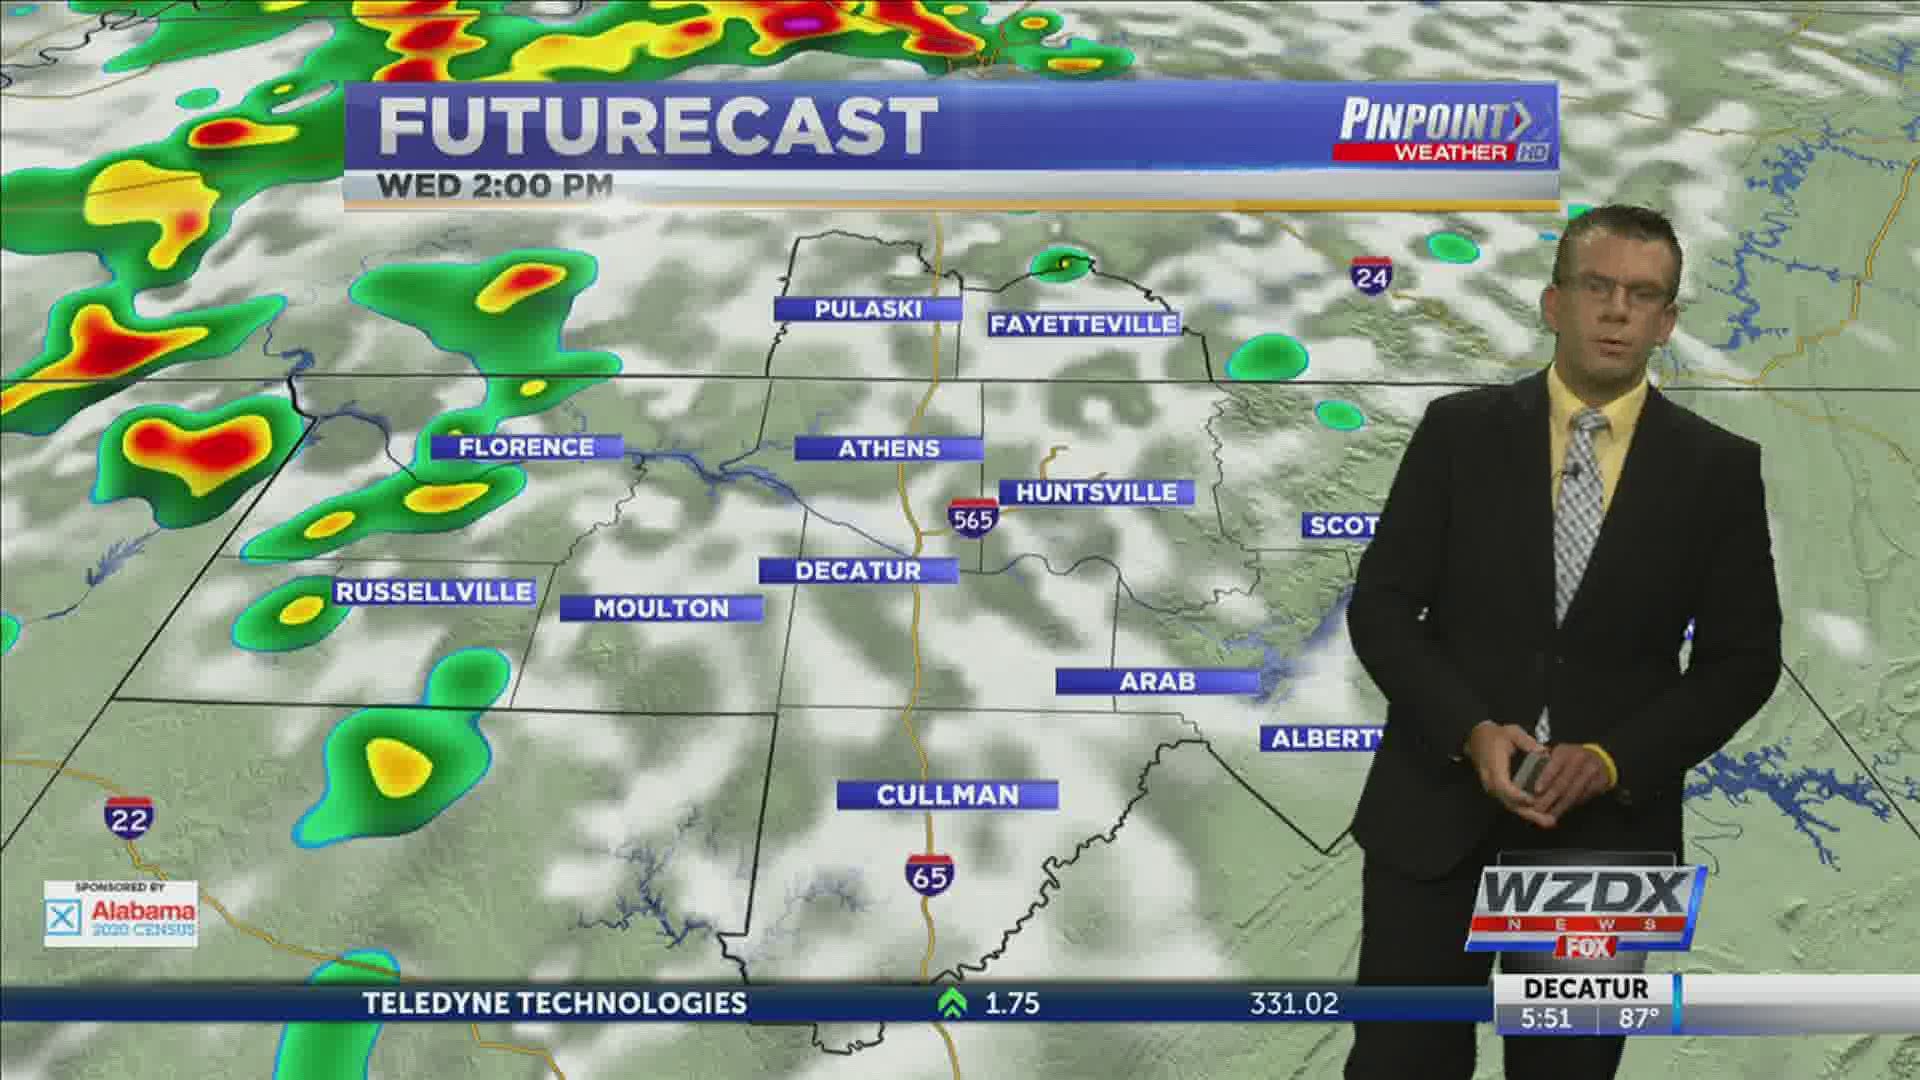 Showers and Storms Likely through the rest of the week